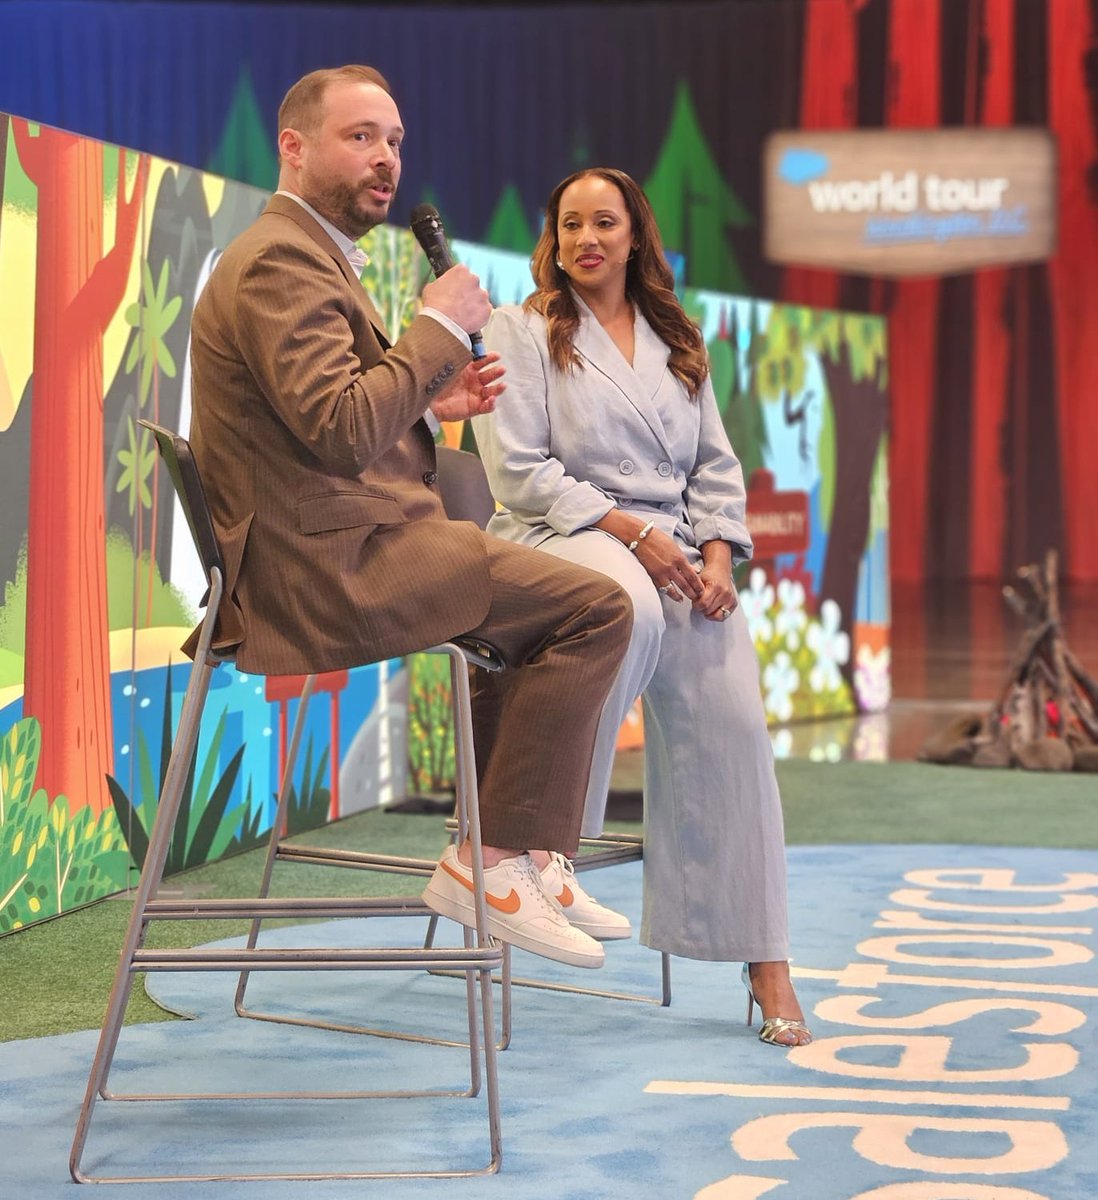 Excited to see the @USAID team give a keynote at the @Salesforce World Tour to discuss how USAID is modernizing international dev efforts and our new Customer Relationship Management system makes it easier to track our engagements and develop sustainable trusted partnerships.